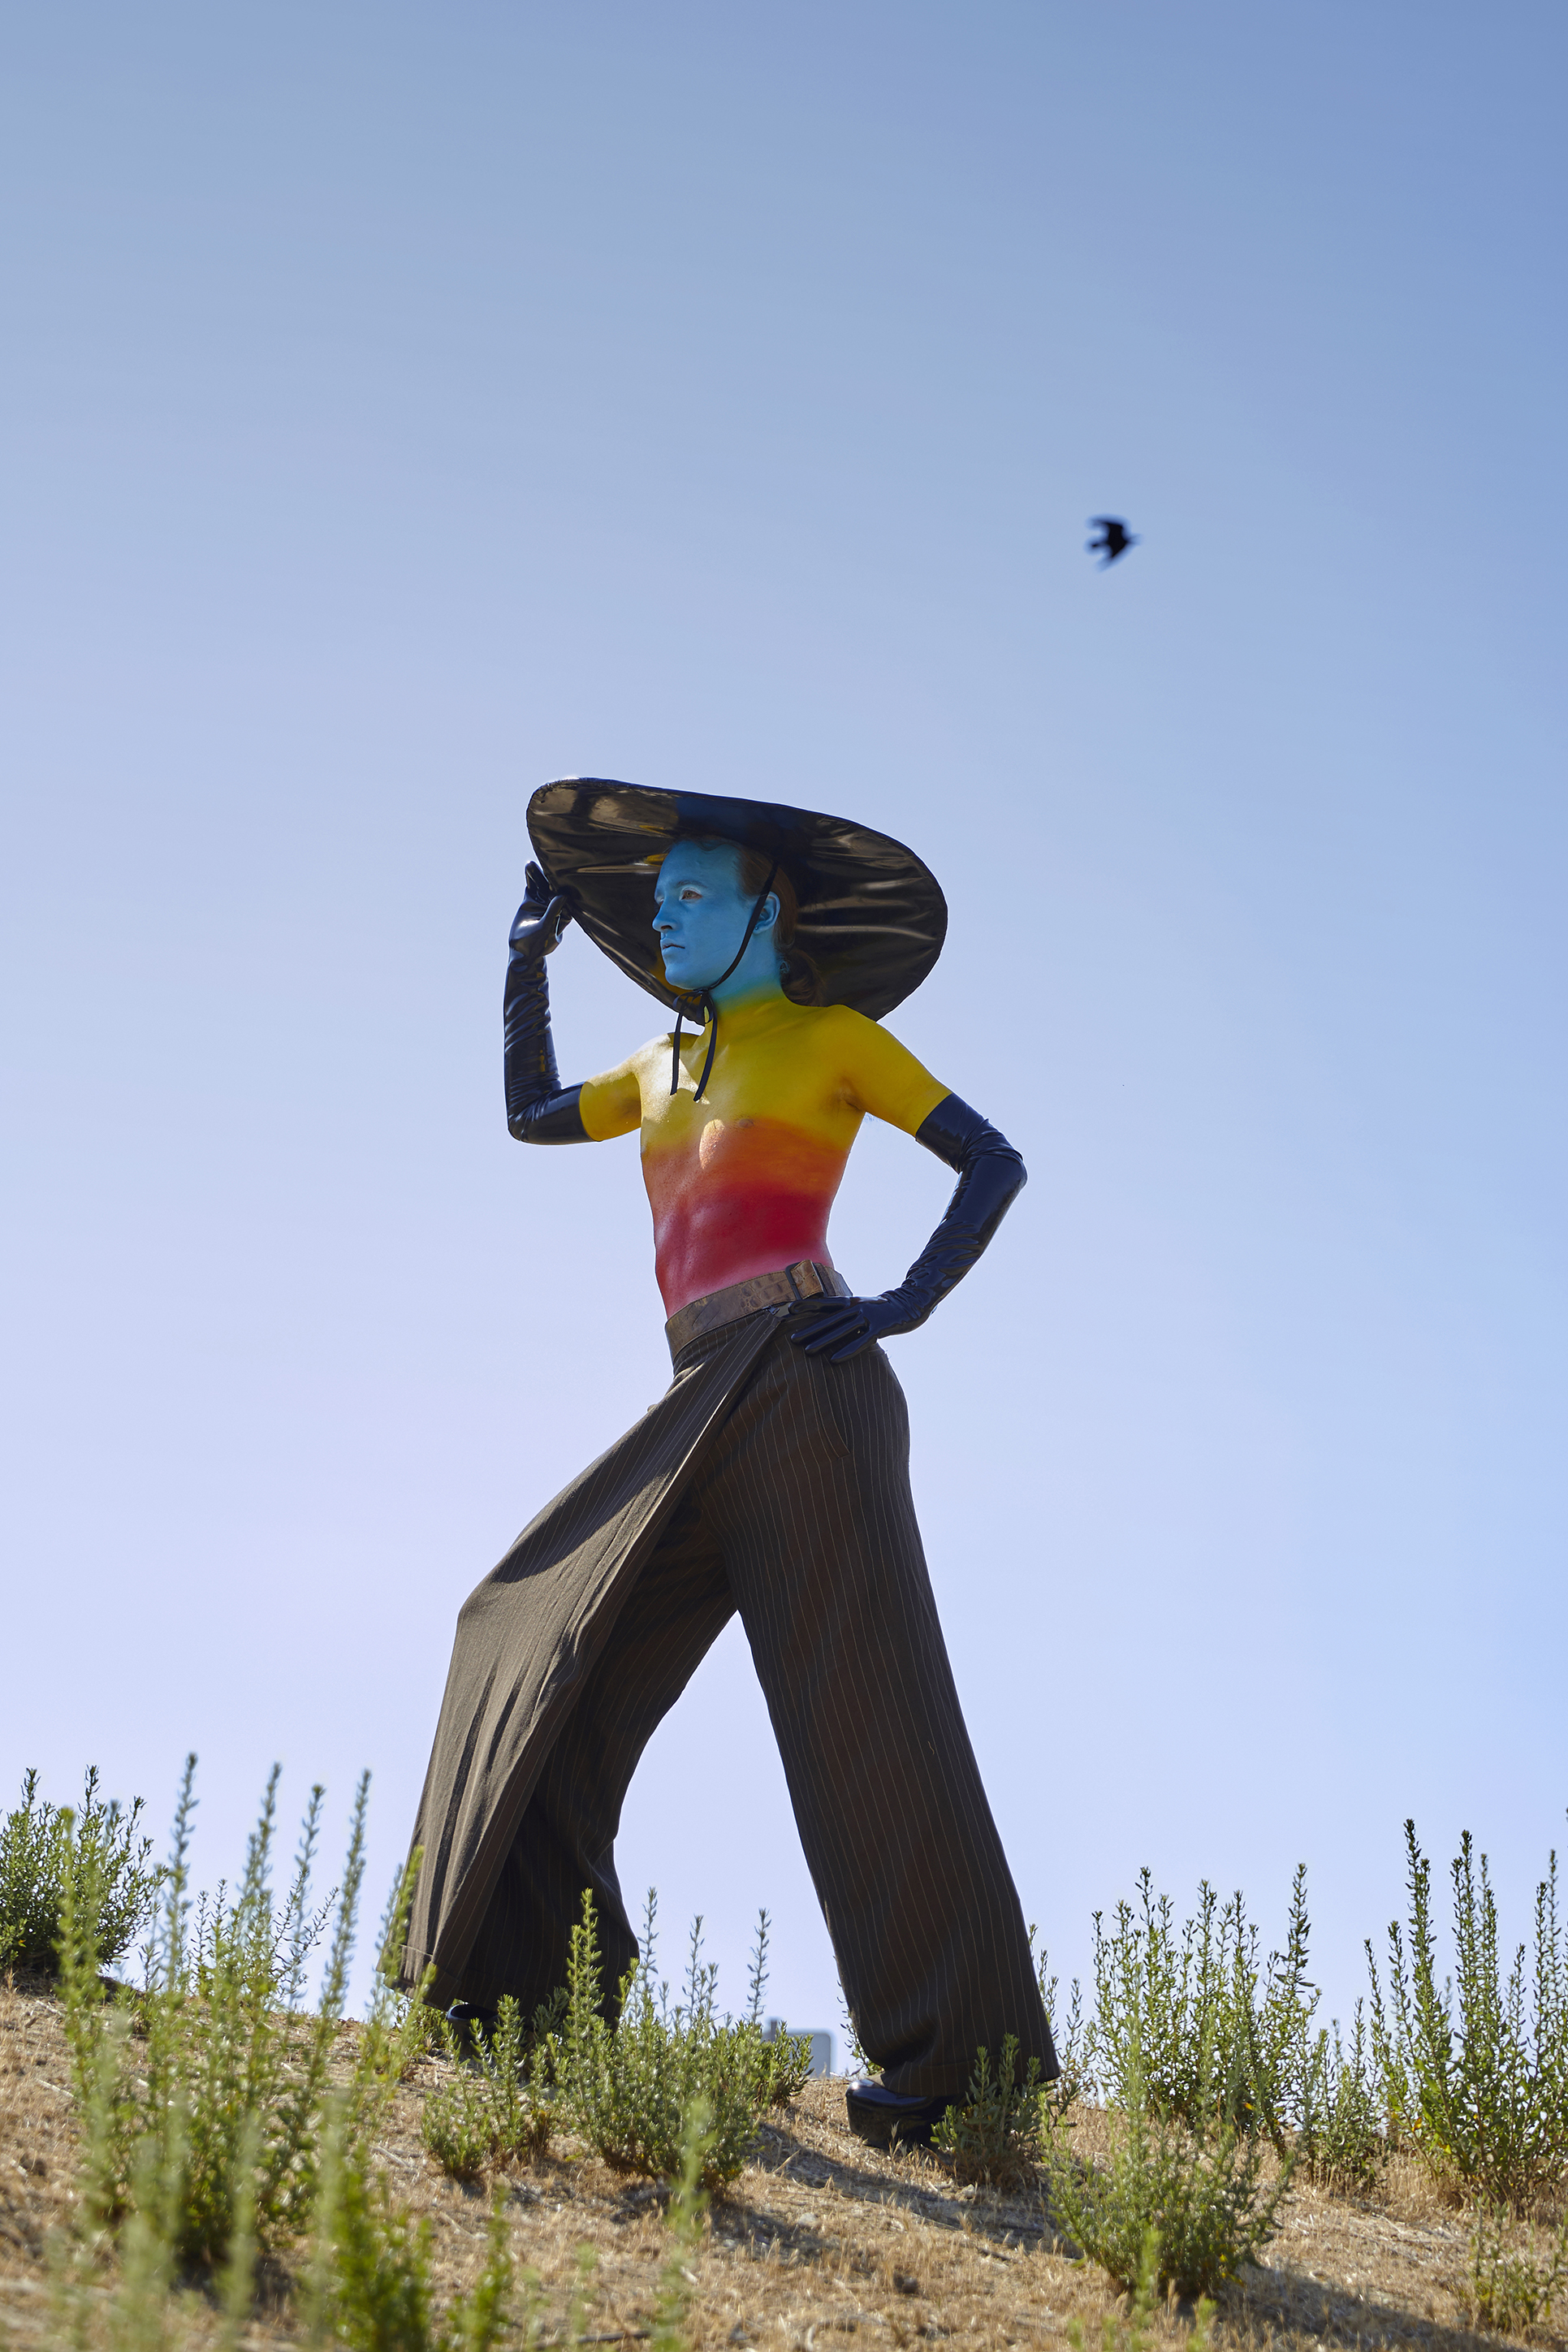 Jesse shirtless with rainbow body paint, latex hat and gloves on a hill outside posing